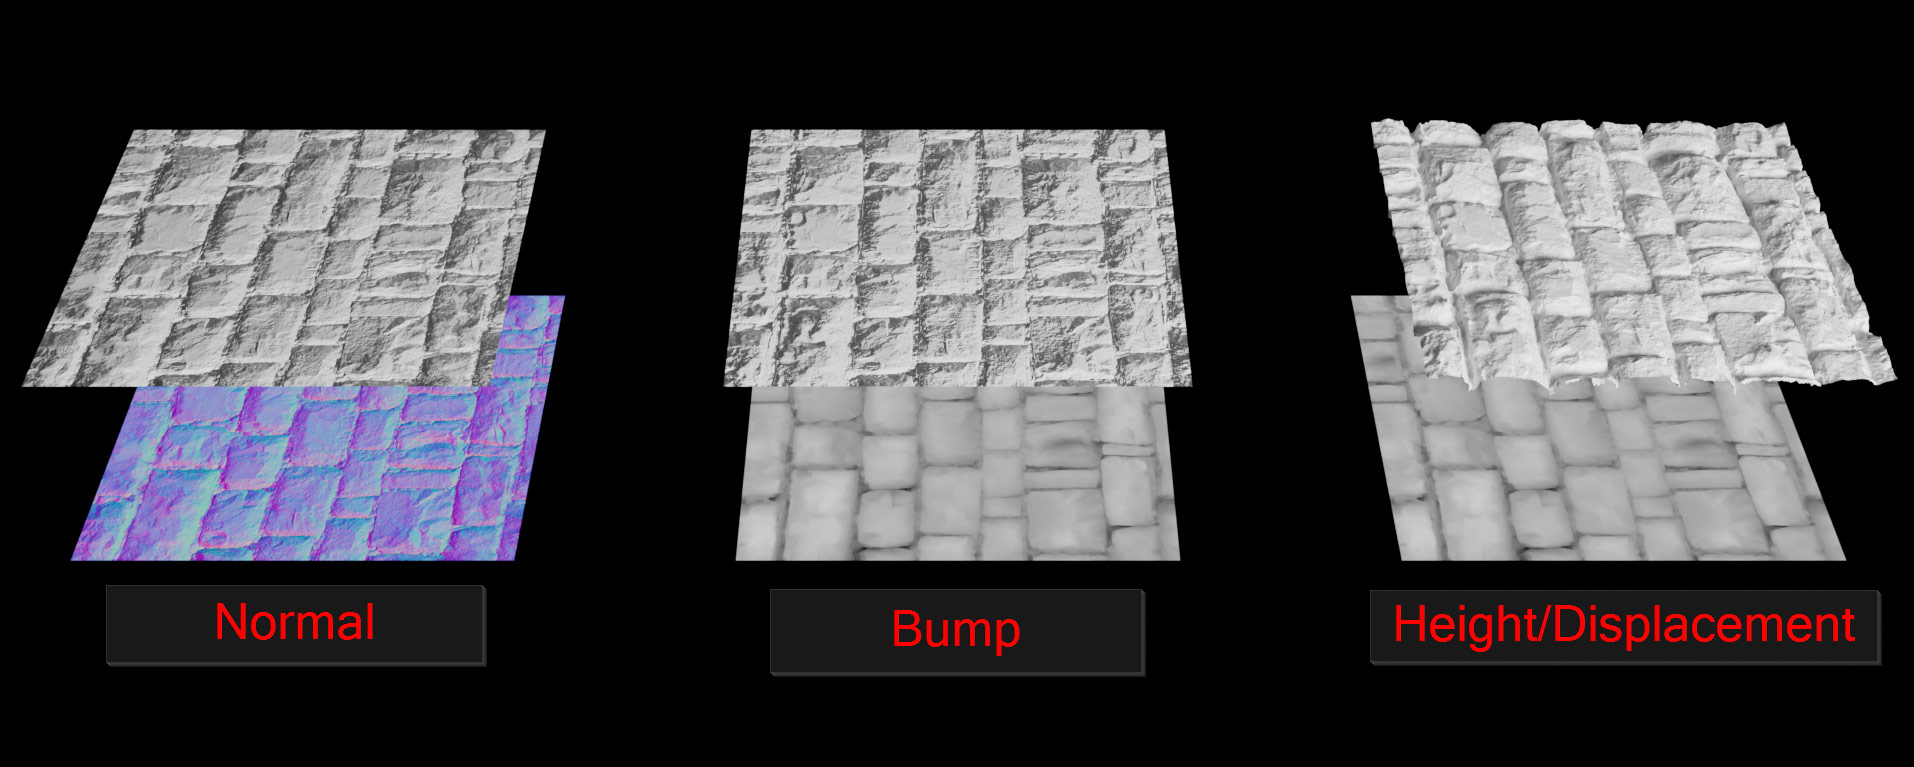 Visual comparison between Normal, Bump, and Height maps